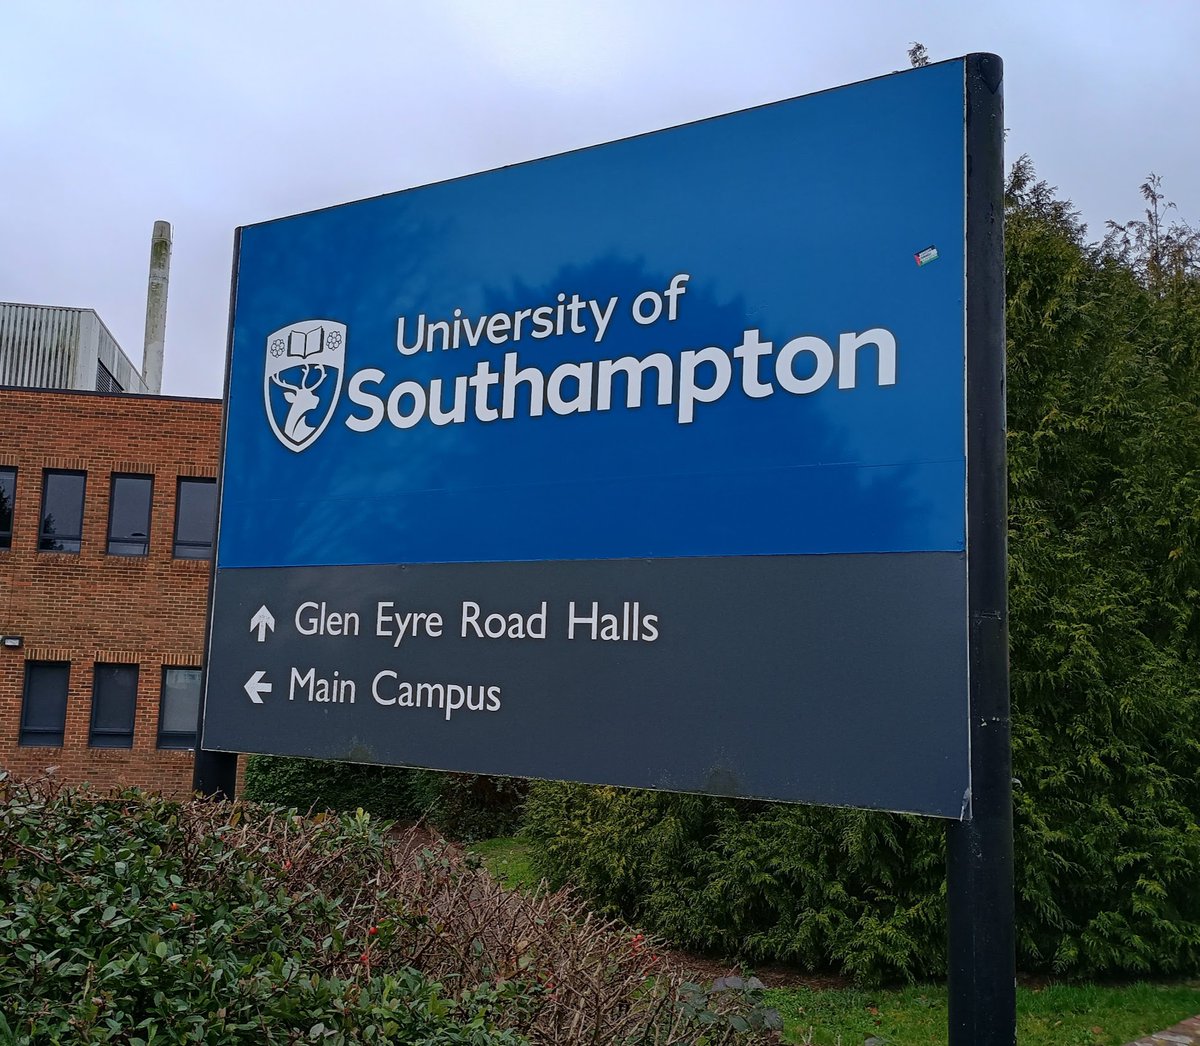 Happy to share that I've joined as a postdoc at the @unisouthampton where I will be working with Prof @gramchurn on @tas_hub & @responsibleaiuk projects & with Prof @ProfSebStein on @CCAIS_Soton project. Looking fwd to learning new things & doing exciting work in responsible MAS!